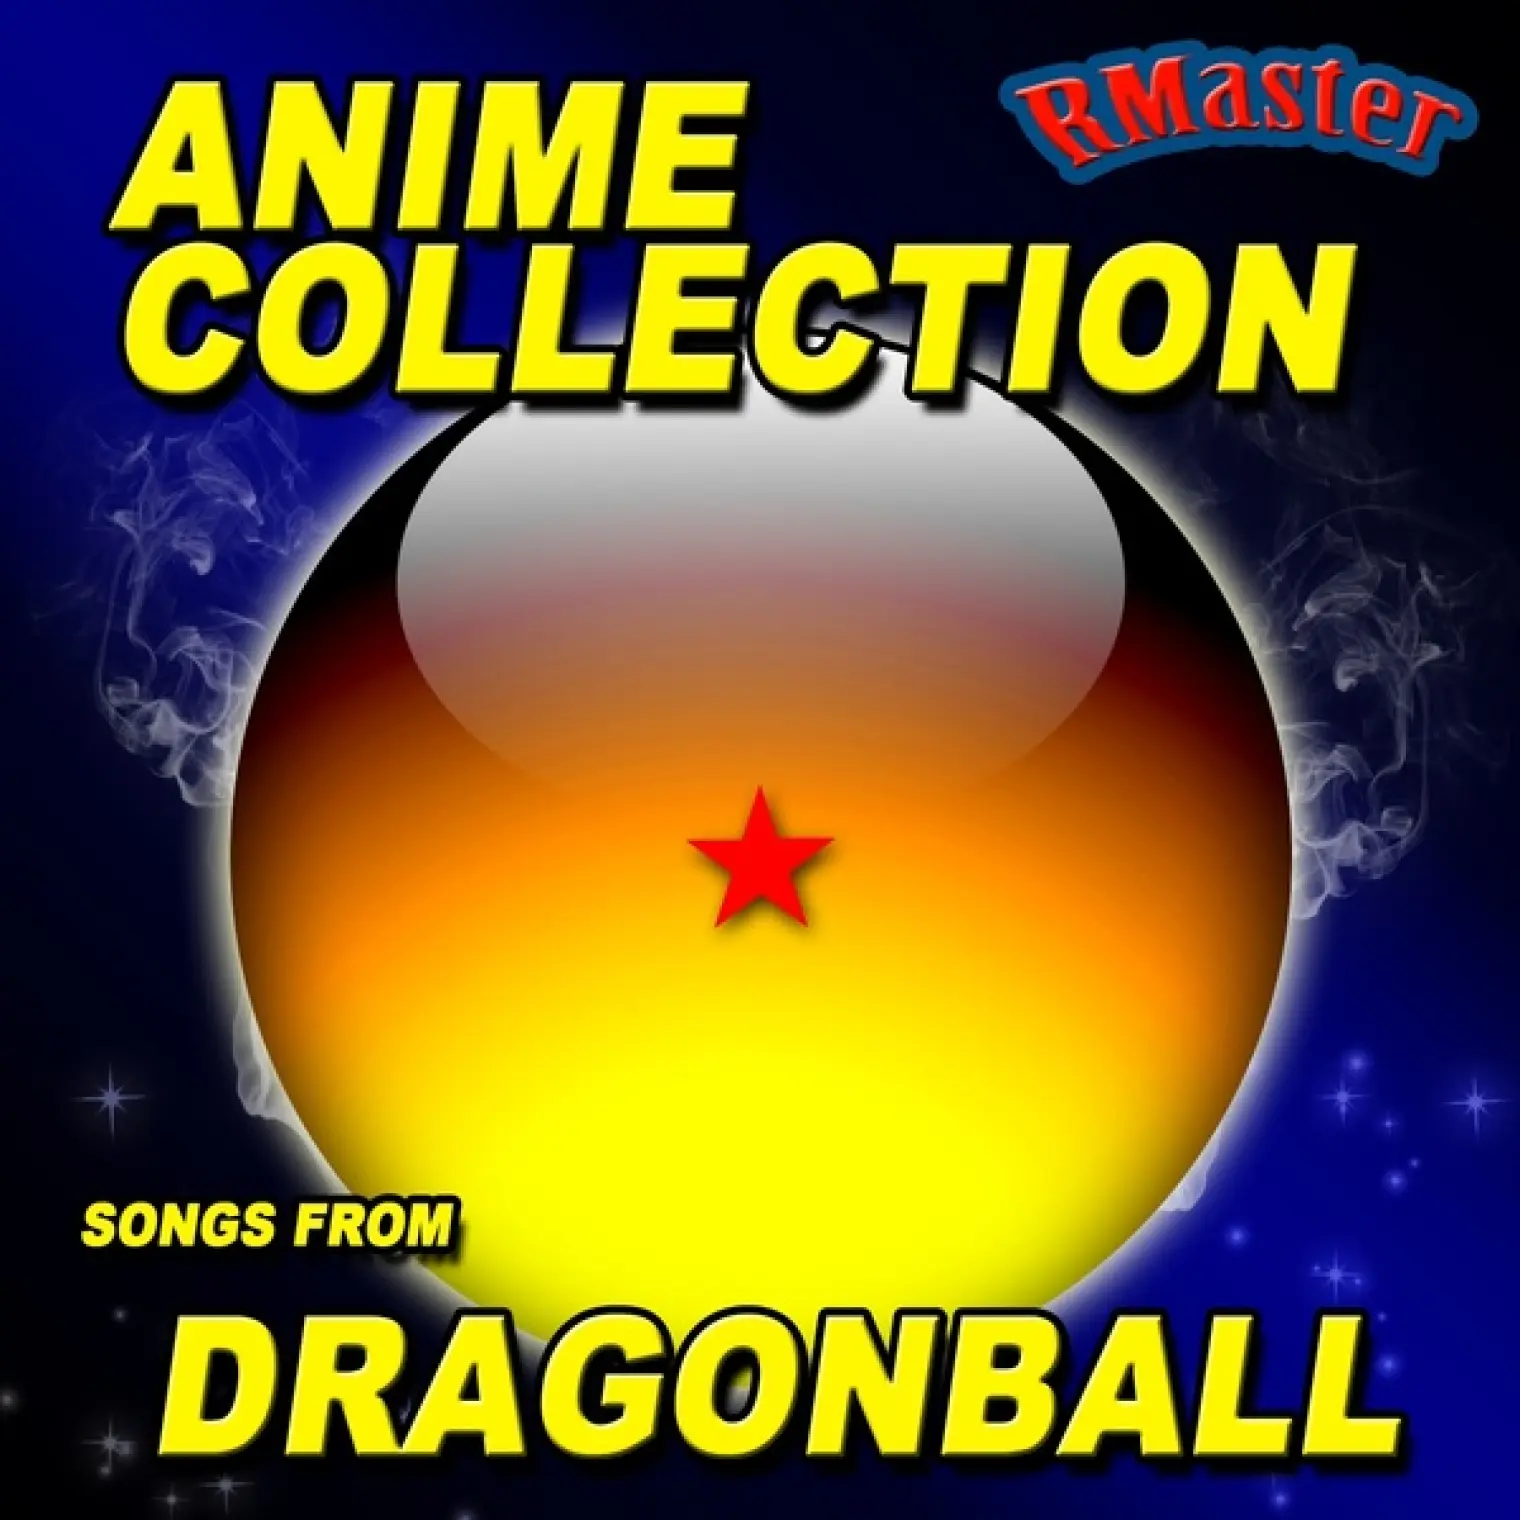 Anime Collection (Songs from Dragonball) -  RMaster 